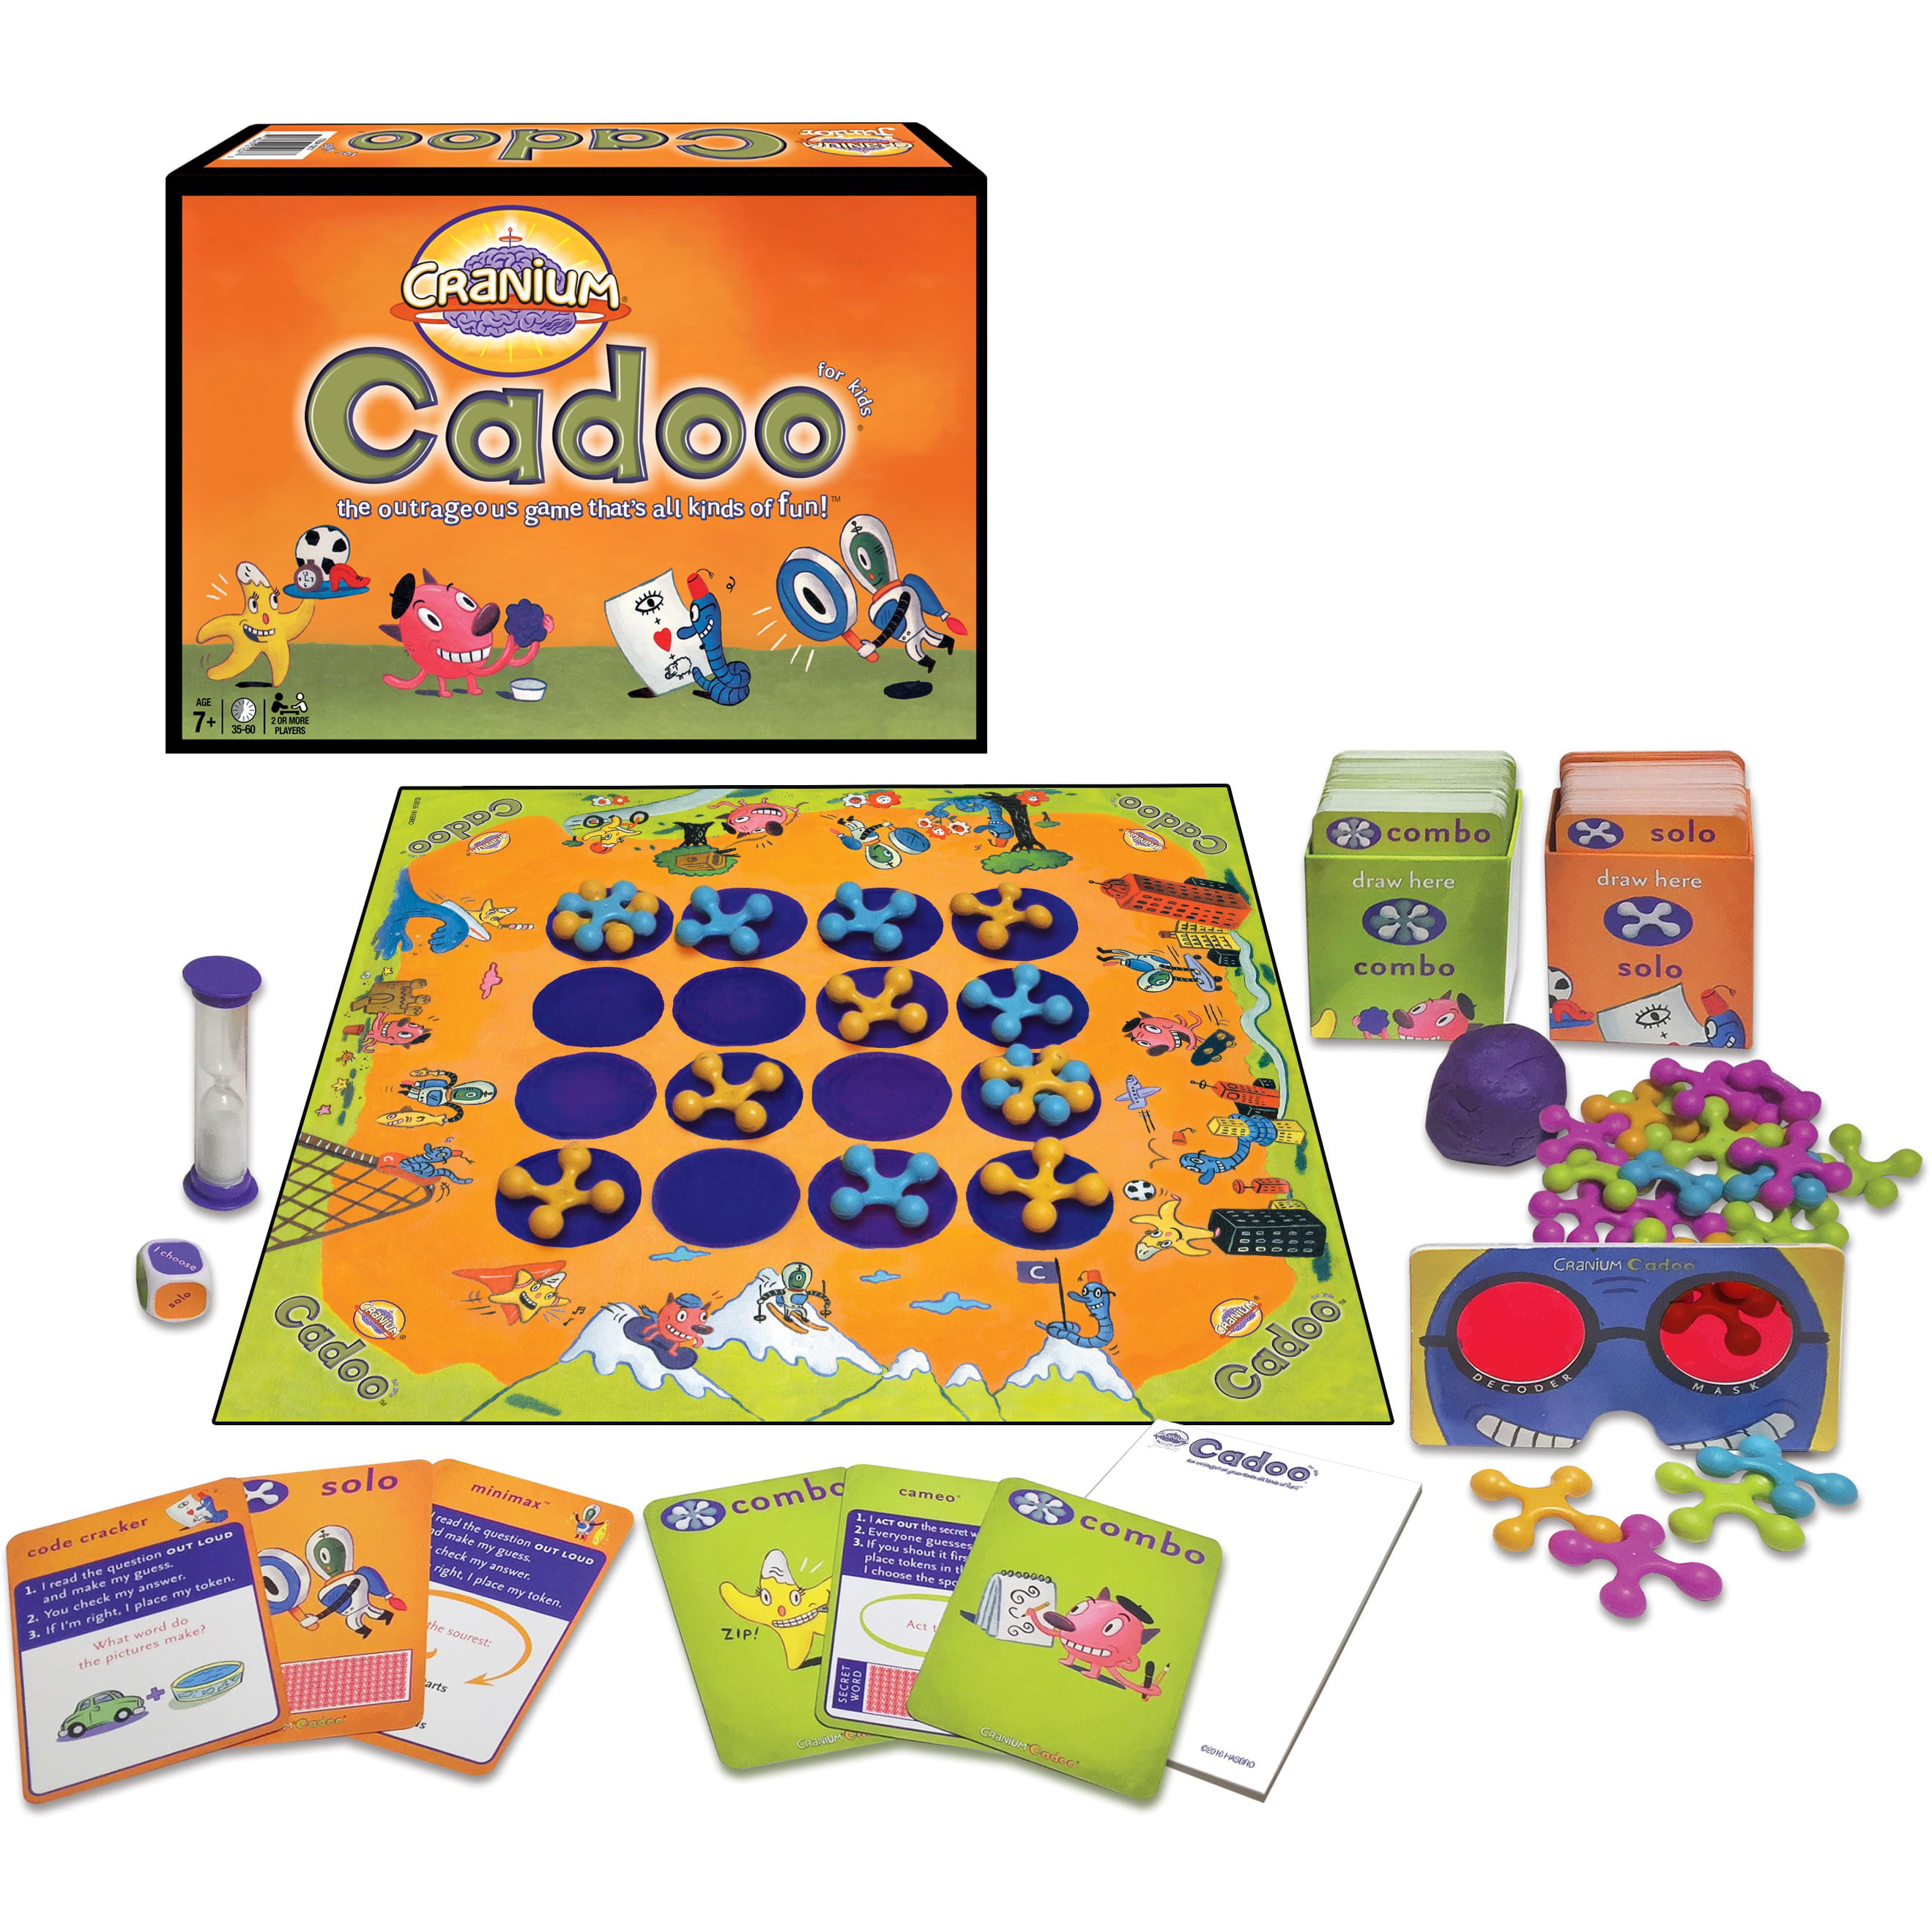 Cranium Cadoo Board Game 2003 Lunchbox Tin Edition for sale online